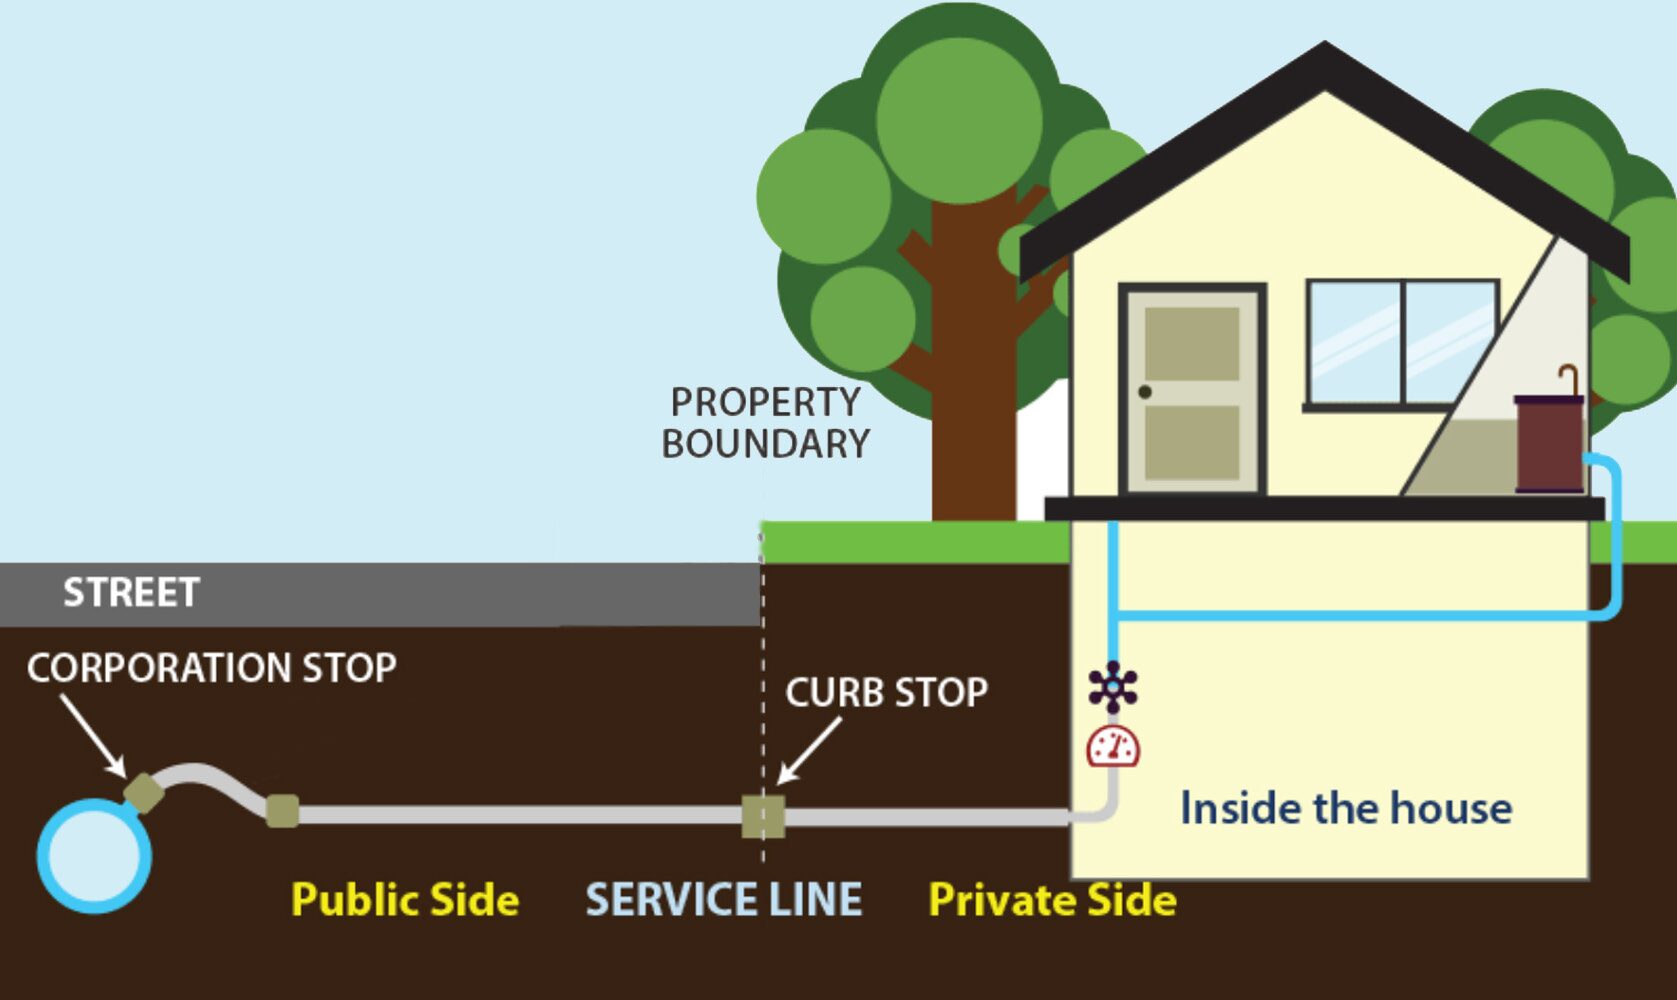 Graphic showing the service line and property boundaries.